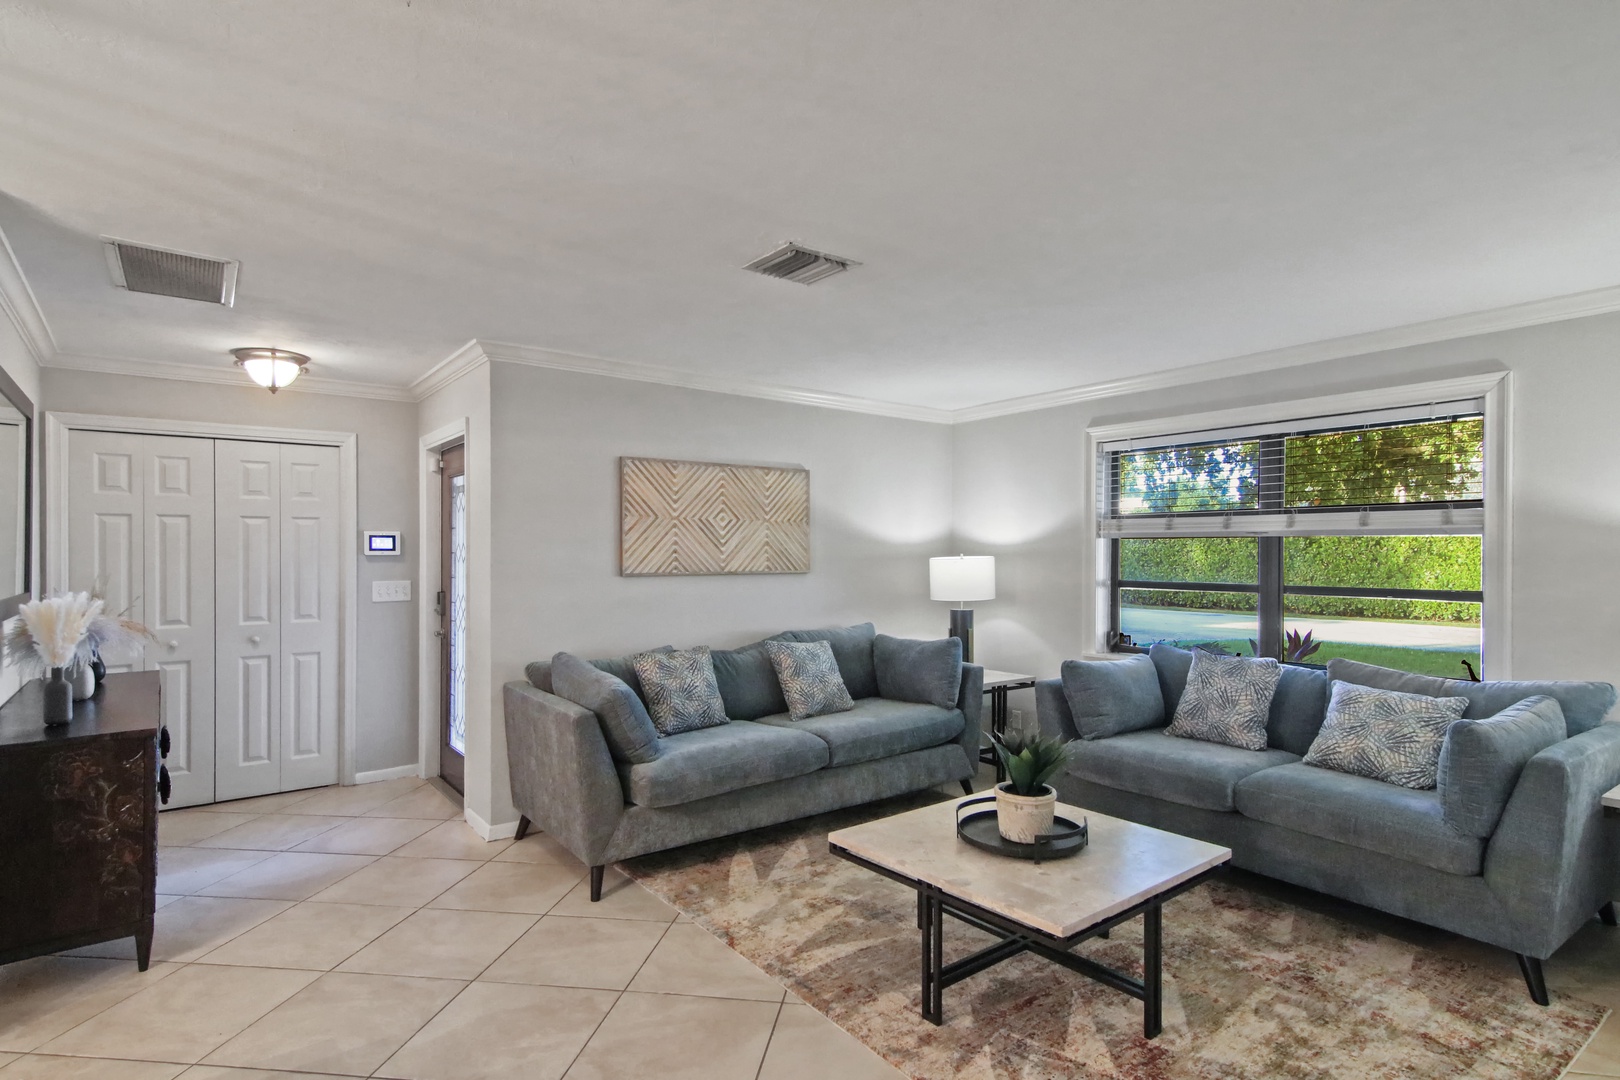 Second living area with comfortable seating